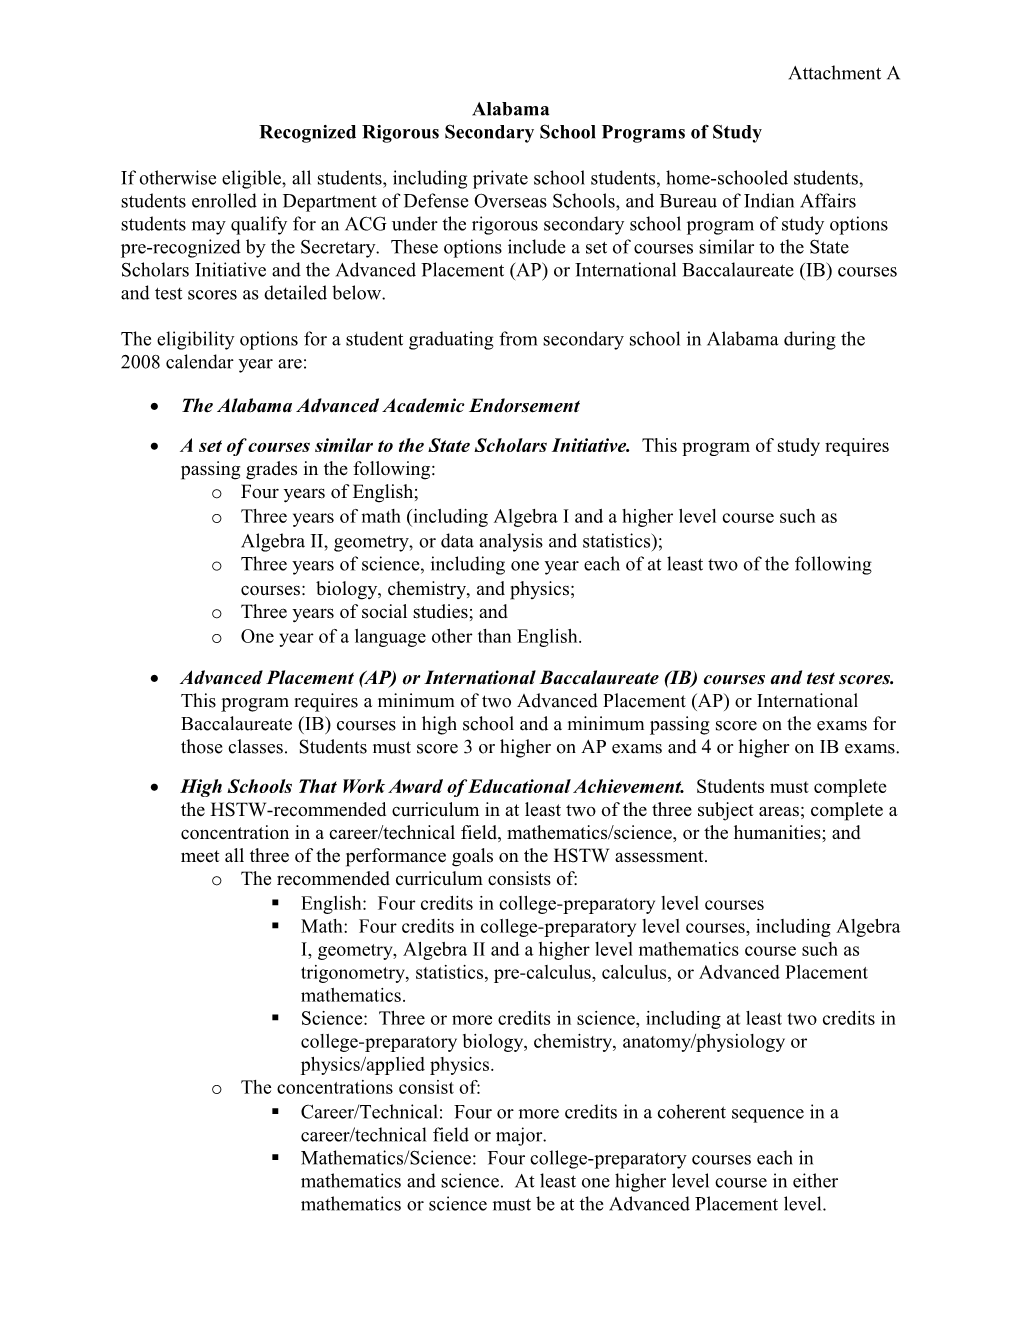 Academic Competitiveness Grants - Attachment to Alabama Letter - 2008 (MS Word)